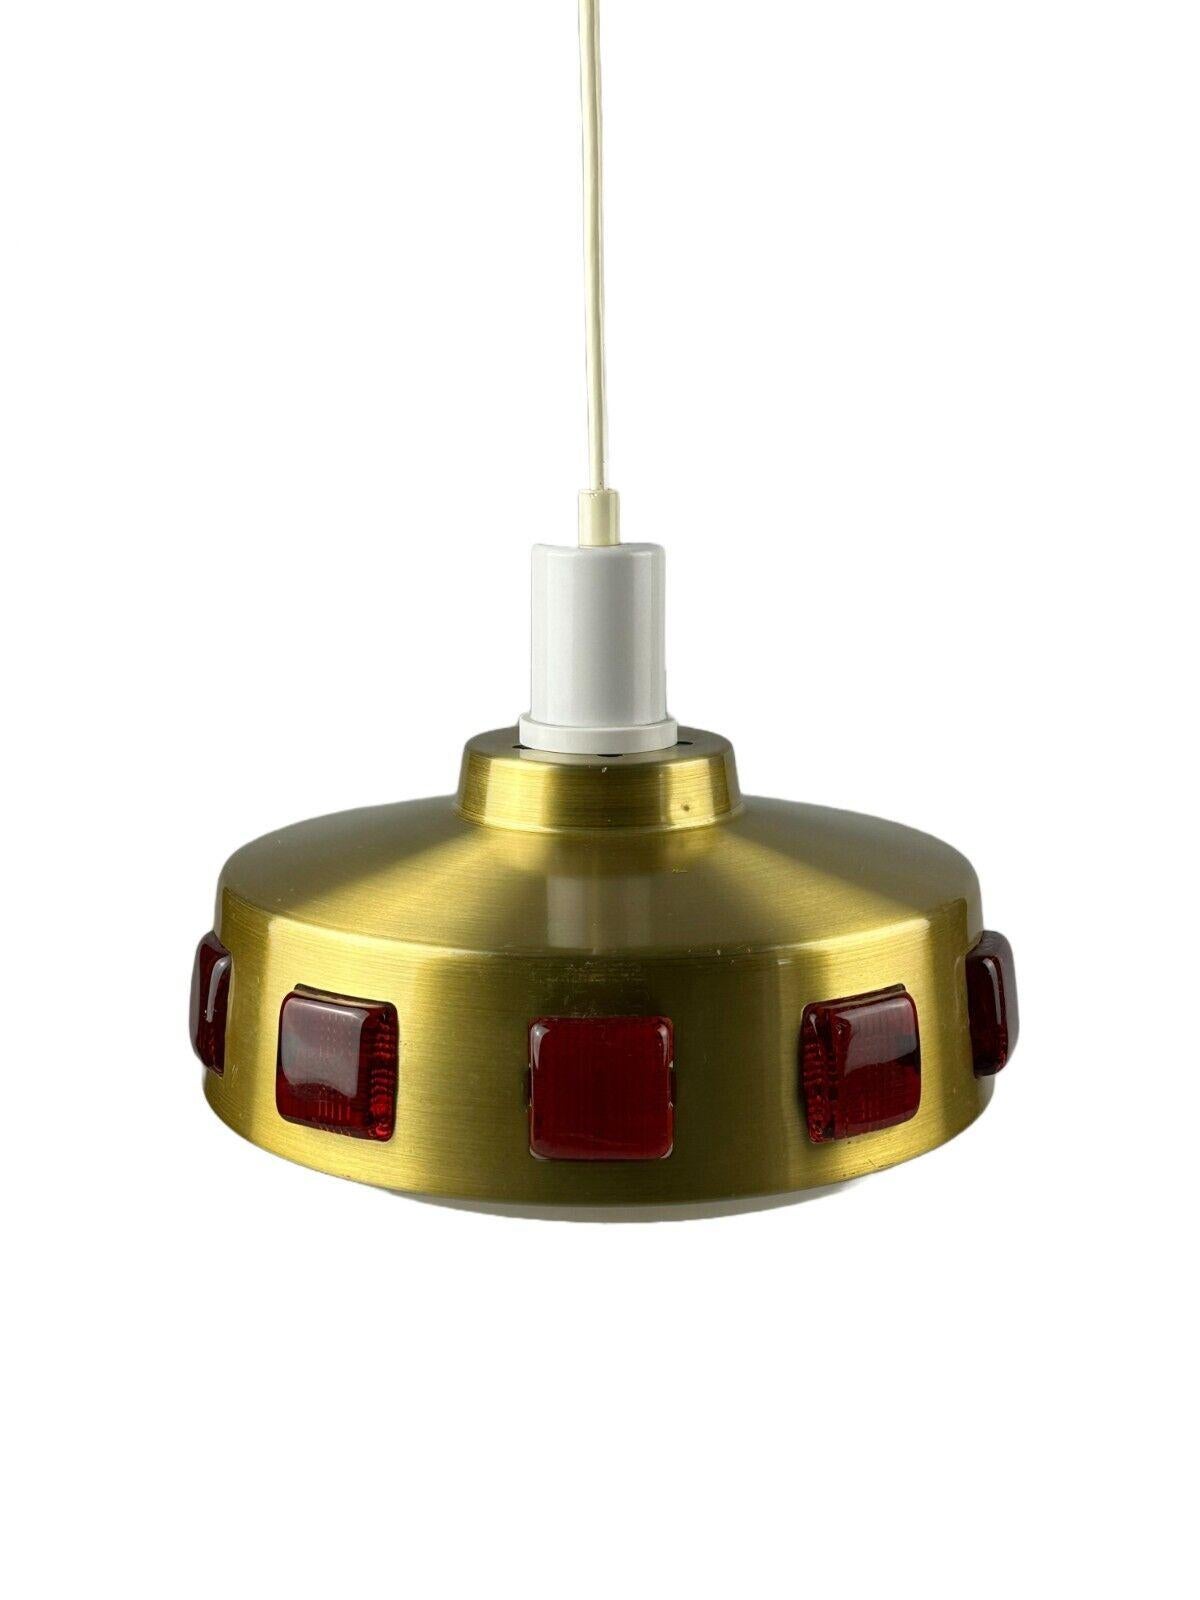 60s 70s ceiling lamp Einar Backström & Erik Höglund metal made in Sweden

Object: ceiling lamp

Manufacturer:

Condition: good

Age: around 1960-1970

Dimensions:

Diameter = 31.5cm
Height = 20cm

Material: glass, metal

Other notes:

E27